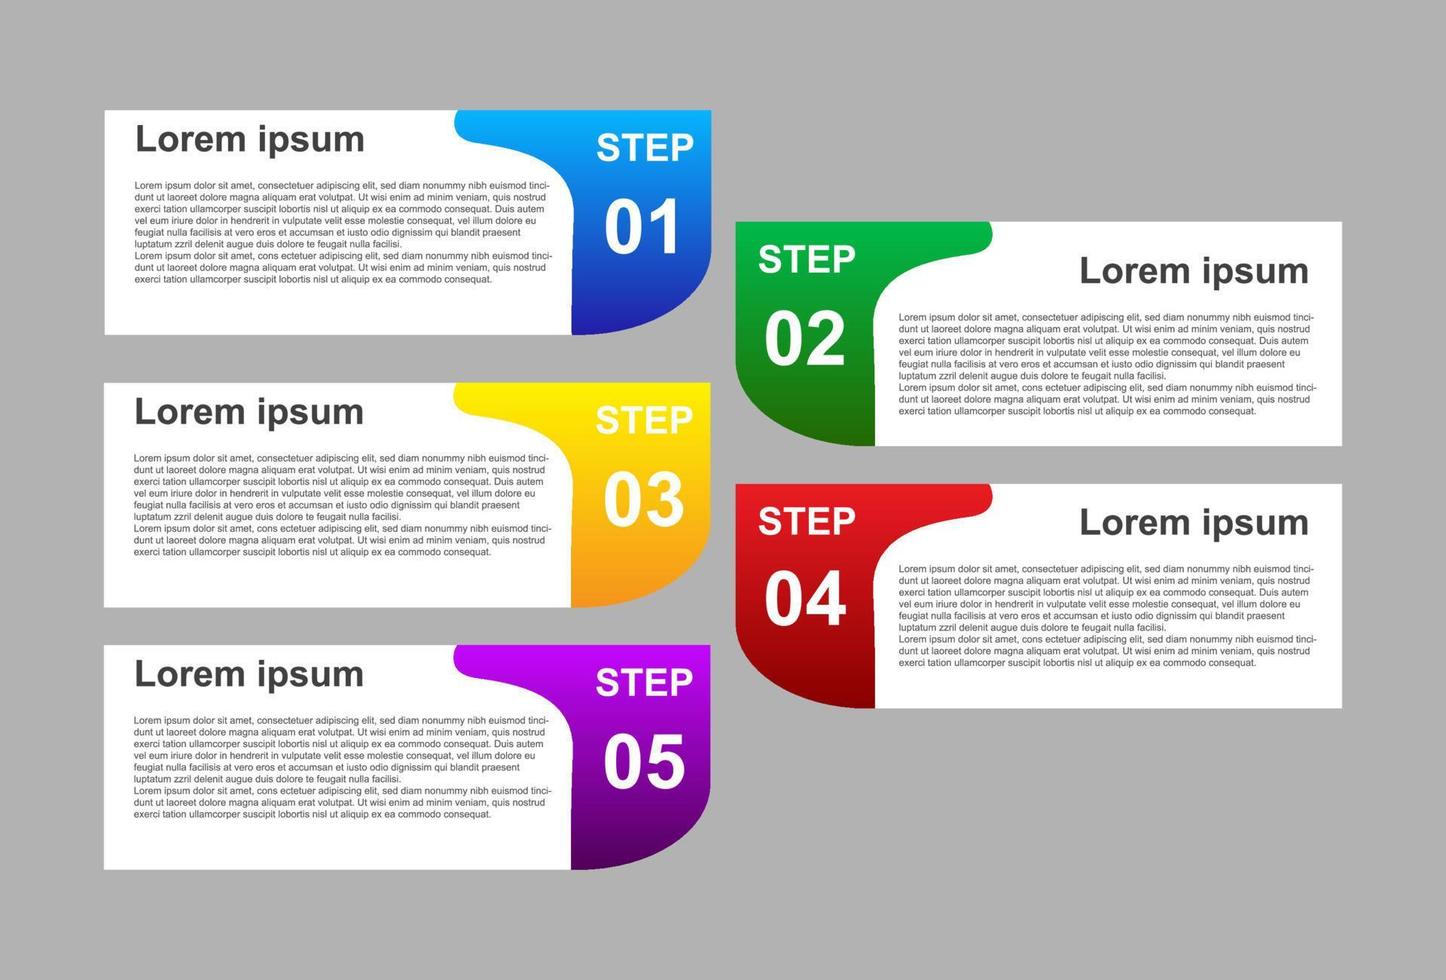 5 step infographic template with full color. designs for banners, presentations and more. vector